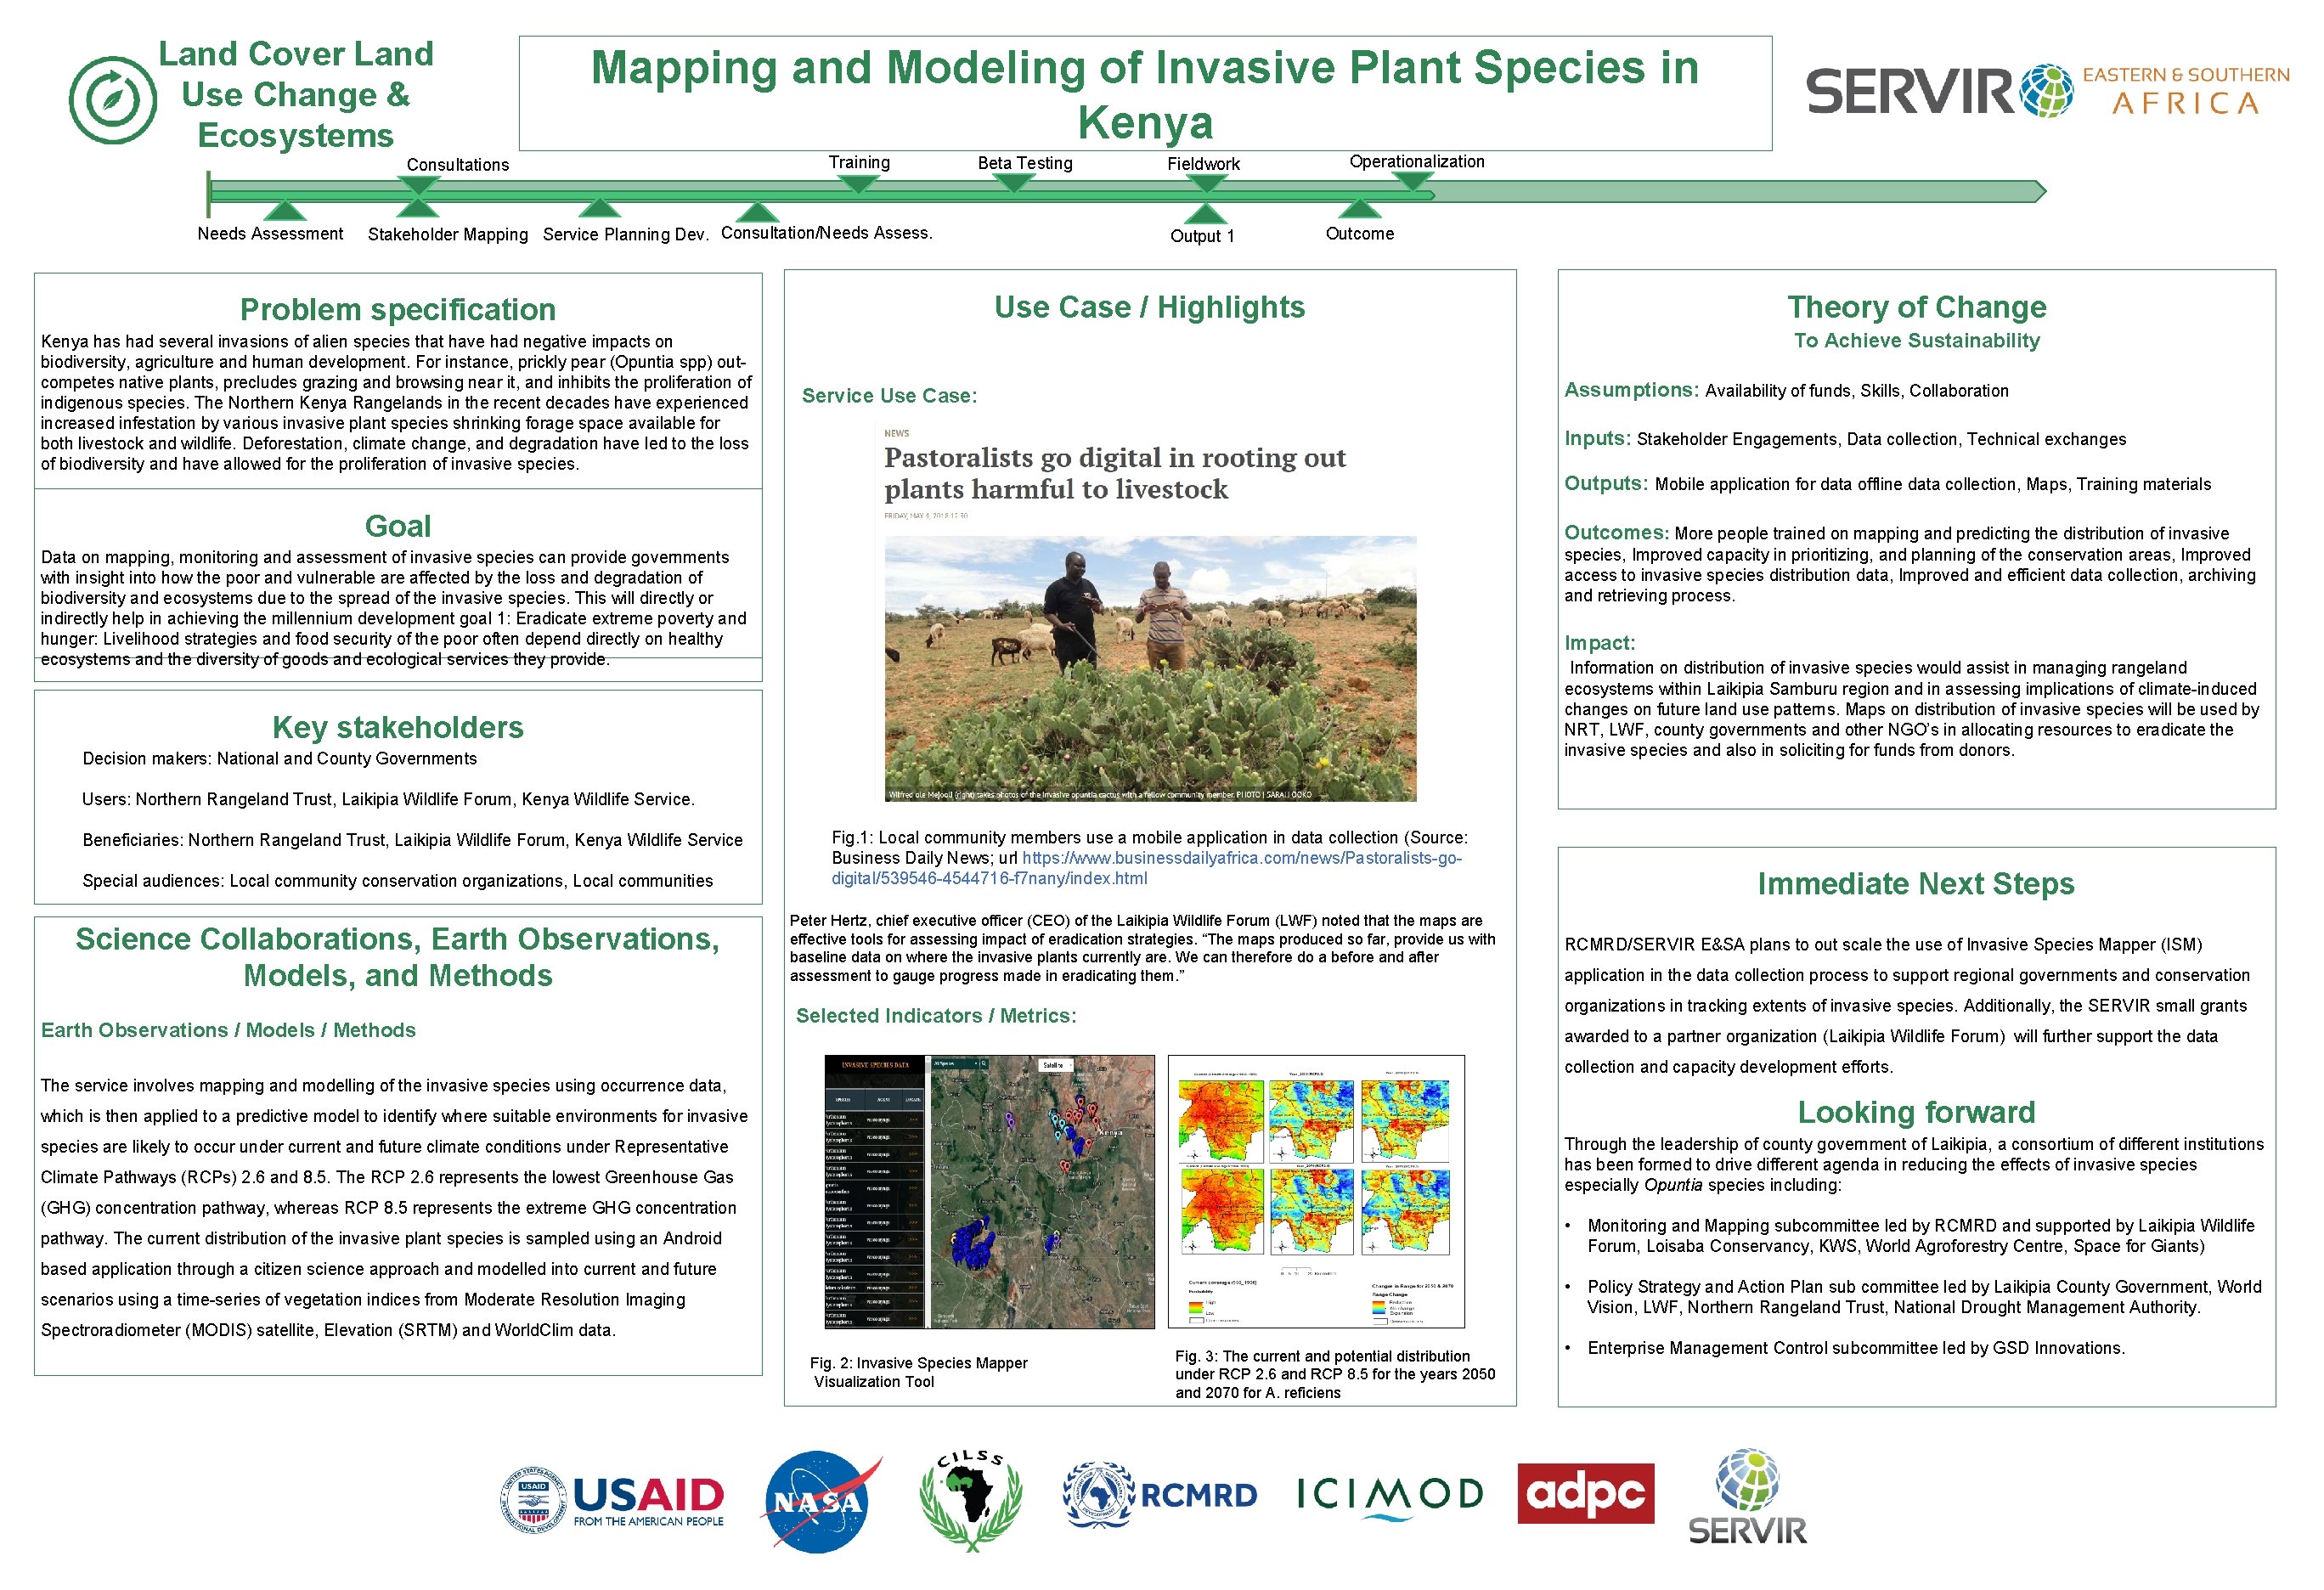 Land Cover Land Use Change & Ecosystems Mapping and Modeling of Invasive Plant Species